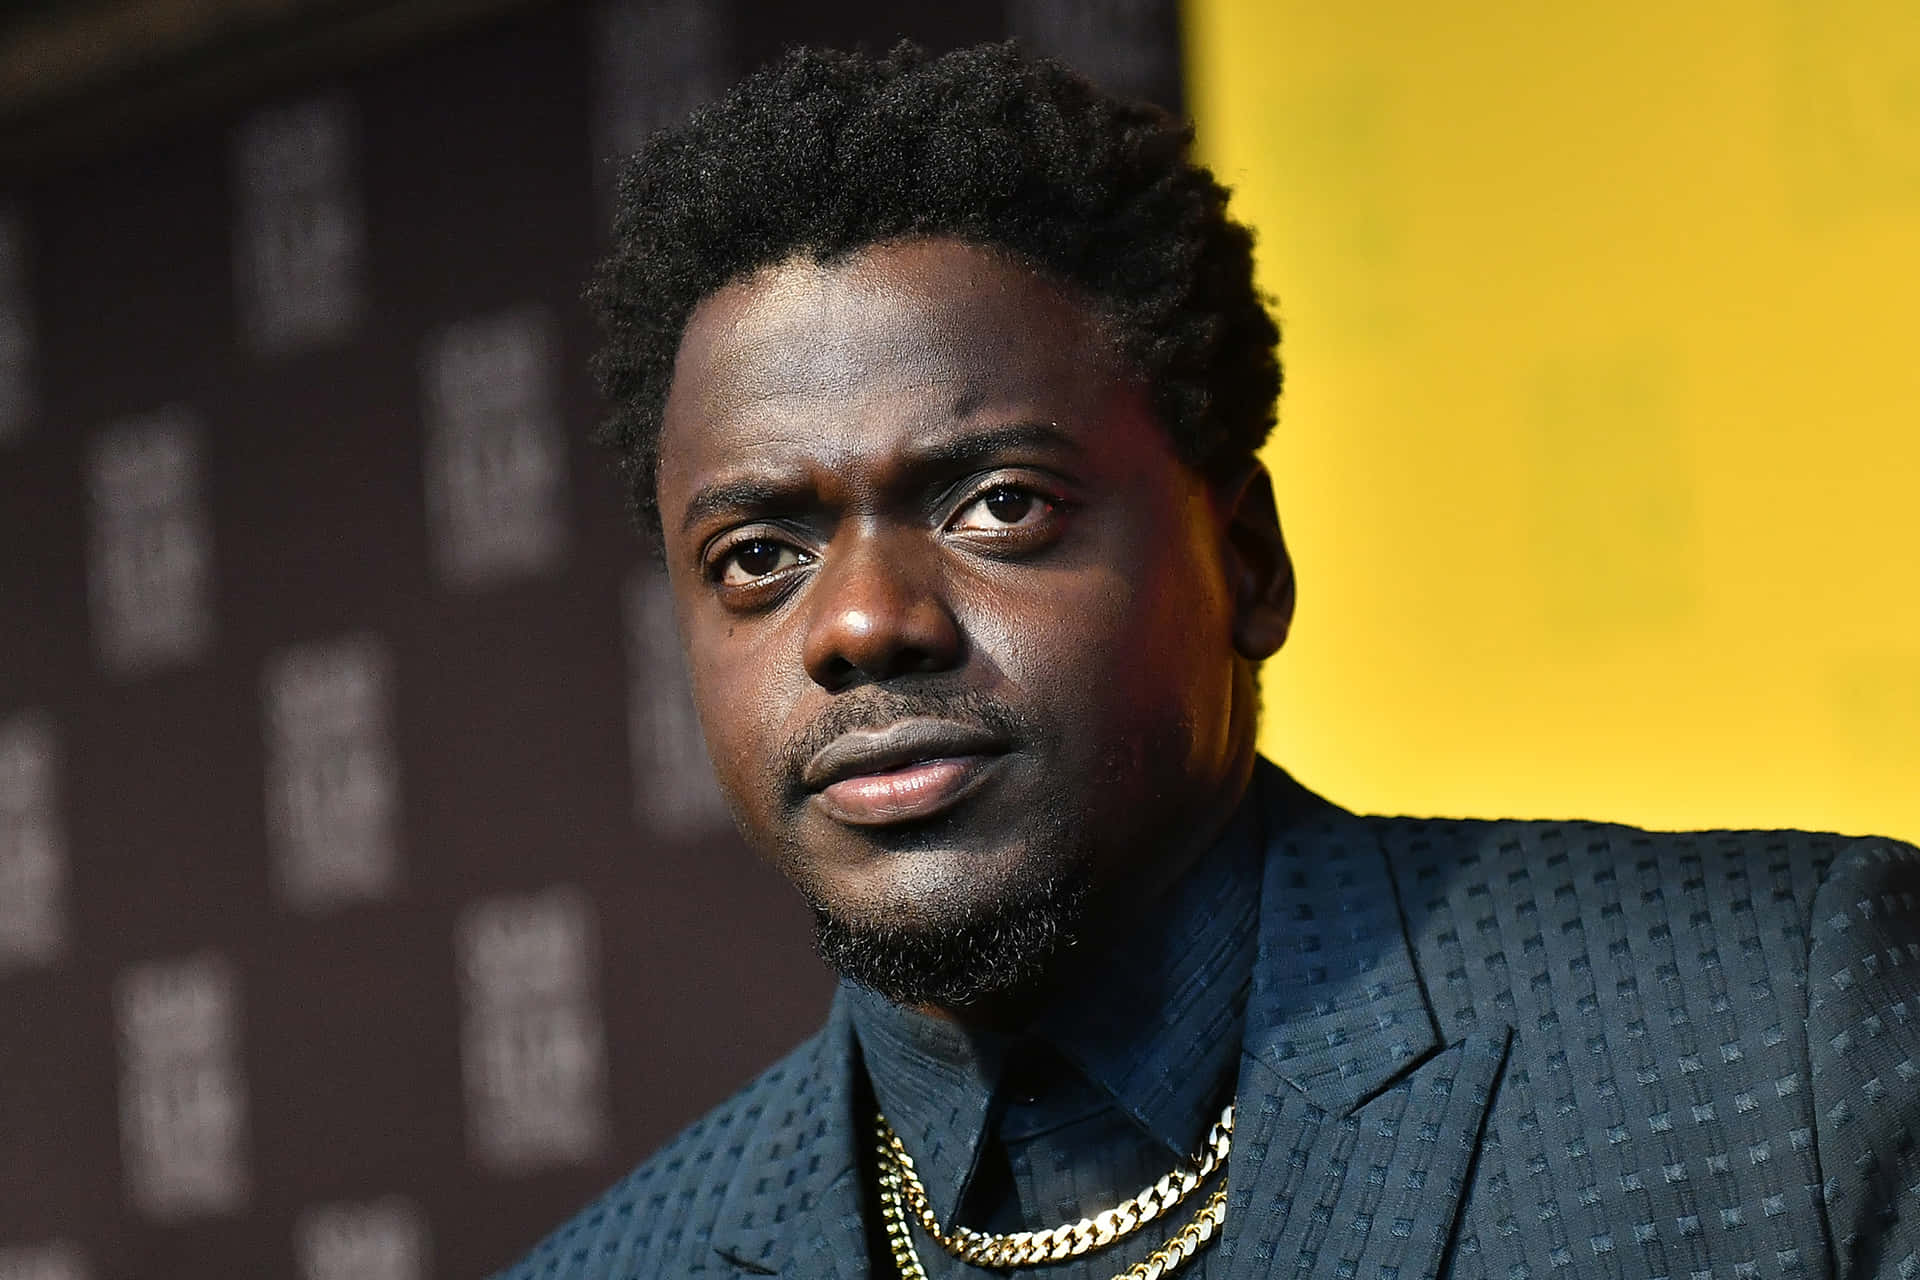 Daniel Kaluuya is an actor known for Get Out, Black Panther, and many other films. Wallpaper